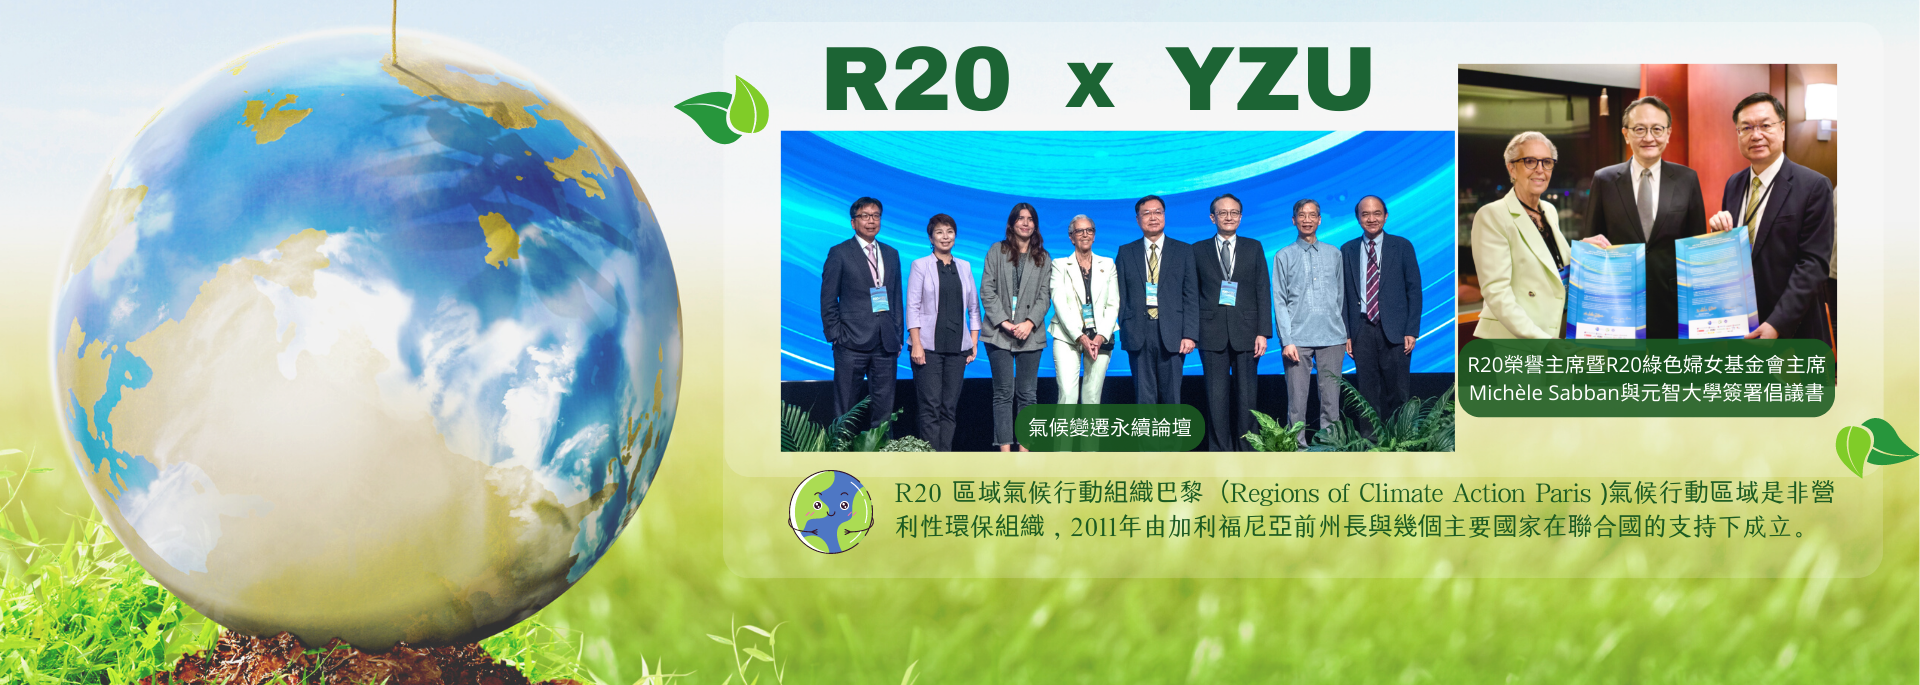 YZU Sustainability|YZU hands with R20 to hold a forum about climate change and sustainability